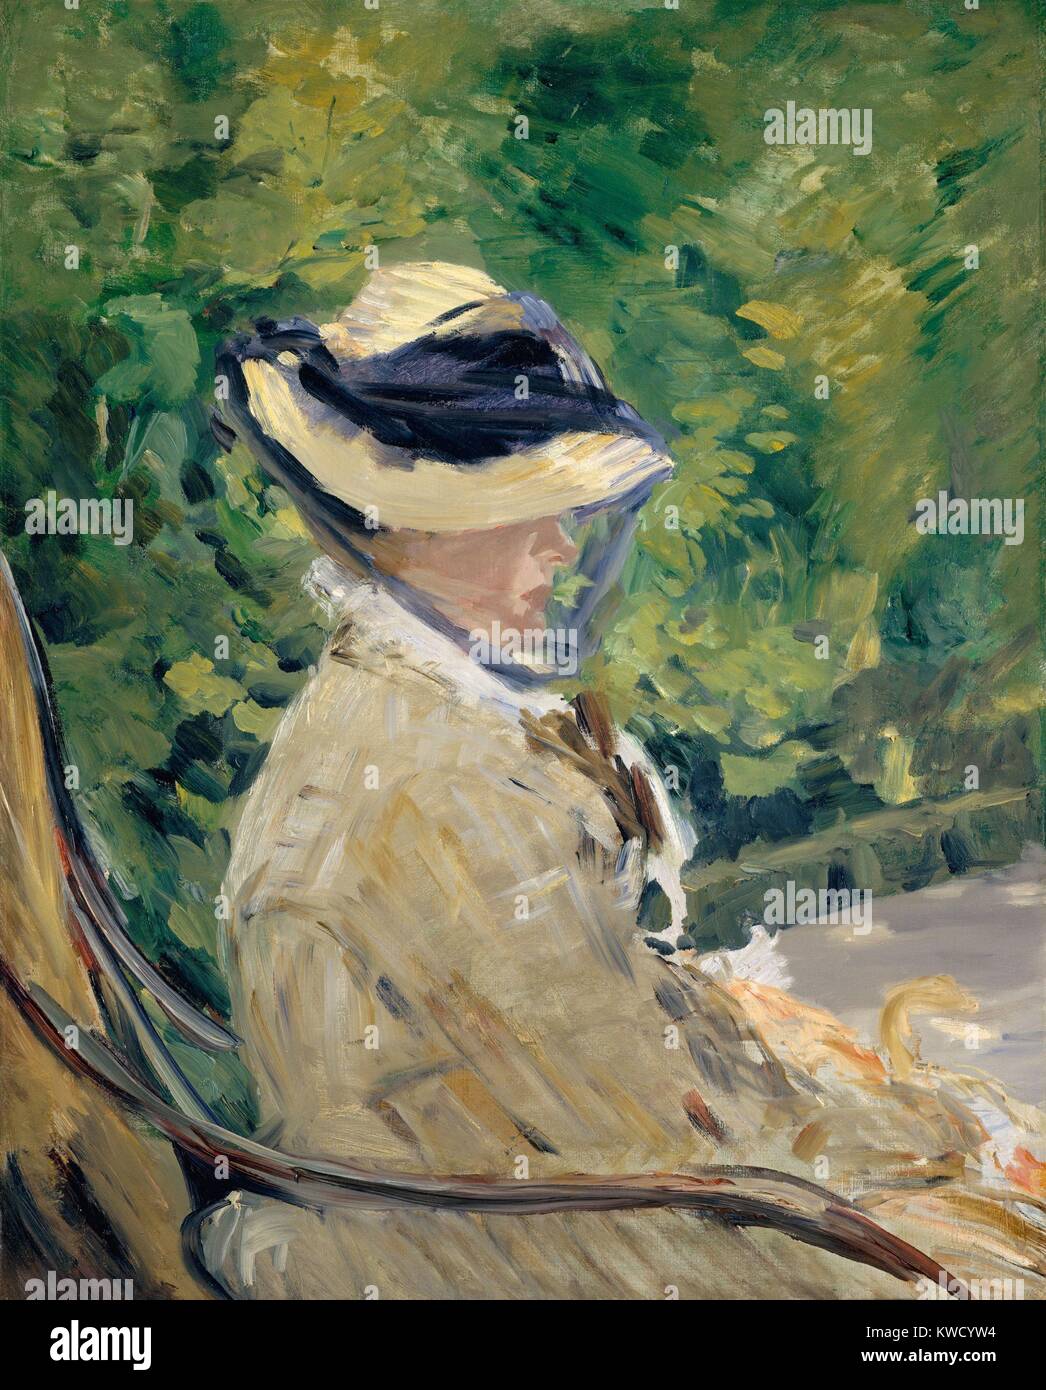 Madame Manet (Suzanne Leenhoff), by Edouard Manet, 1880 French impressionist oil painting. The portrait was painted in the Bellevue suburb of Paris, in the summer of 1880 (BSLOC 2017 3 15) Stock Photo